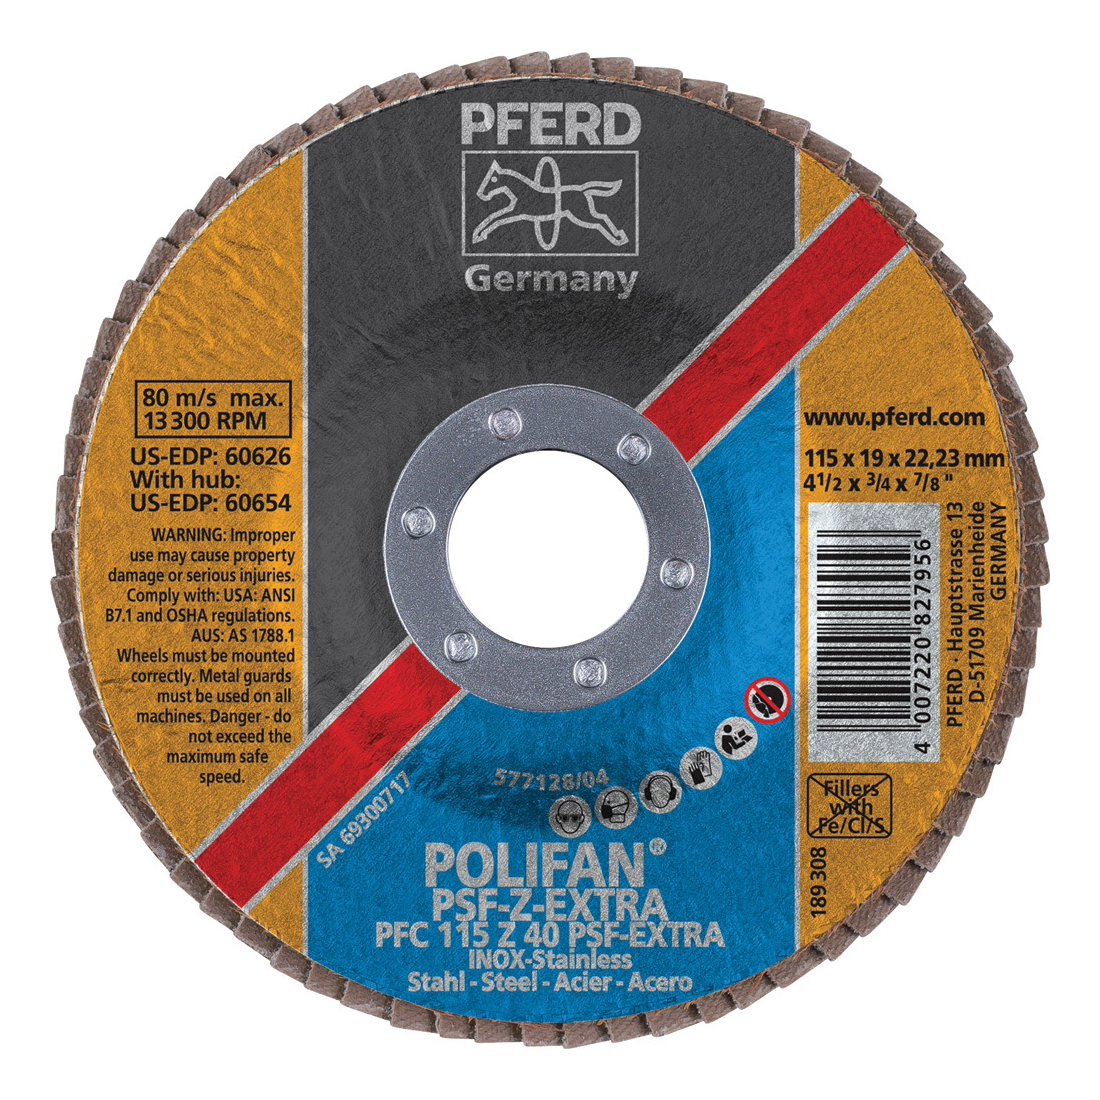 PFERD Polifan® 60626 Universal Line PSF Z-EXTRA Unthreaded Coated Abrasive Flap Disc, 4-1/2 in Dia, 7/8 in Center Hole, 40 Grit, Zirconia Alumina Abrasive, Type 29 Conical Disc